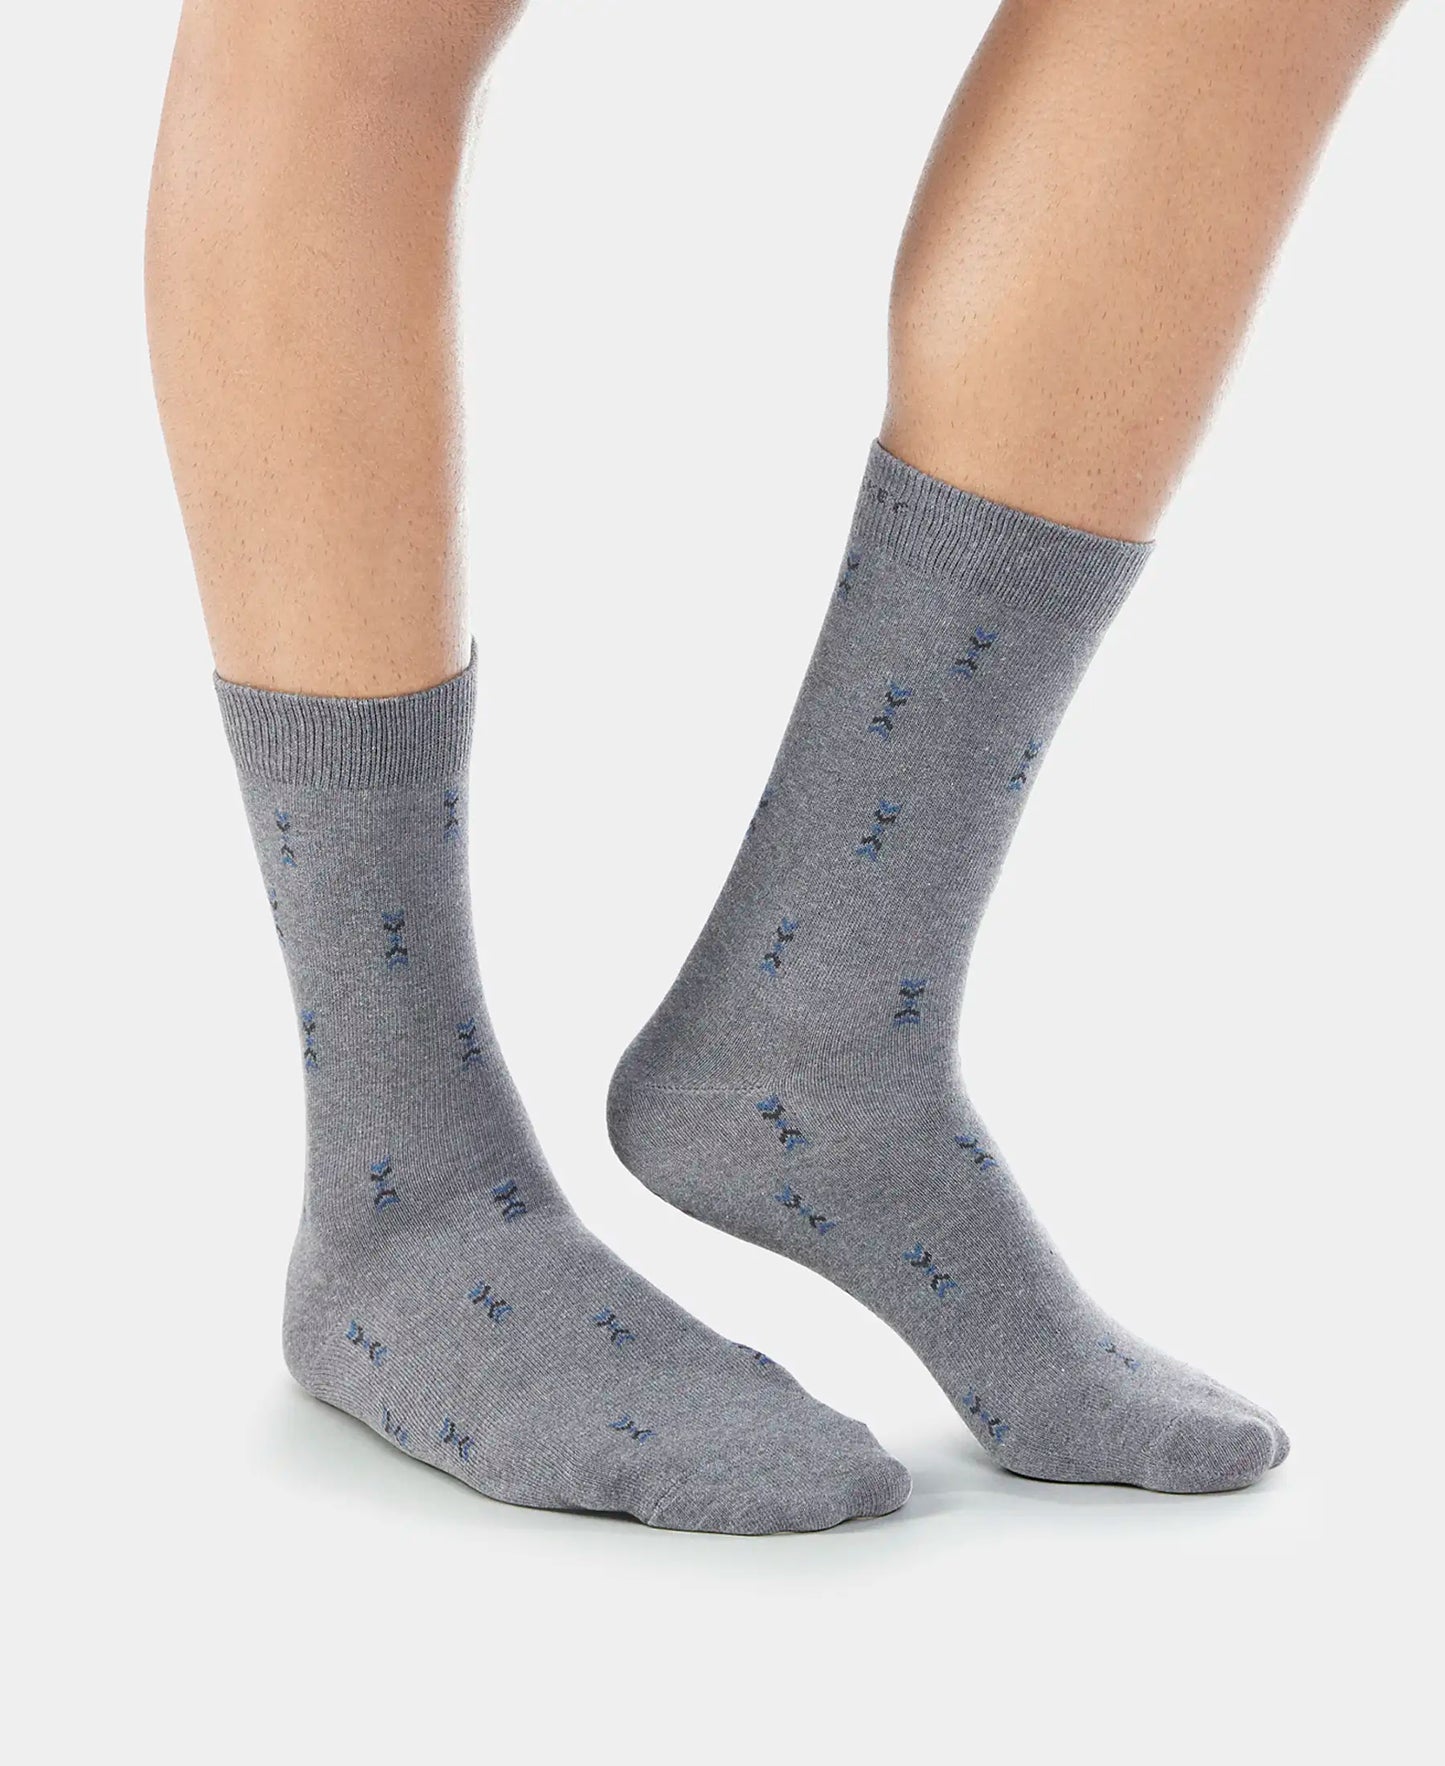 Compact Cotton Crew Length Socks with StayFresh Treatment - Charcoal Melange-3